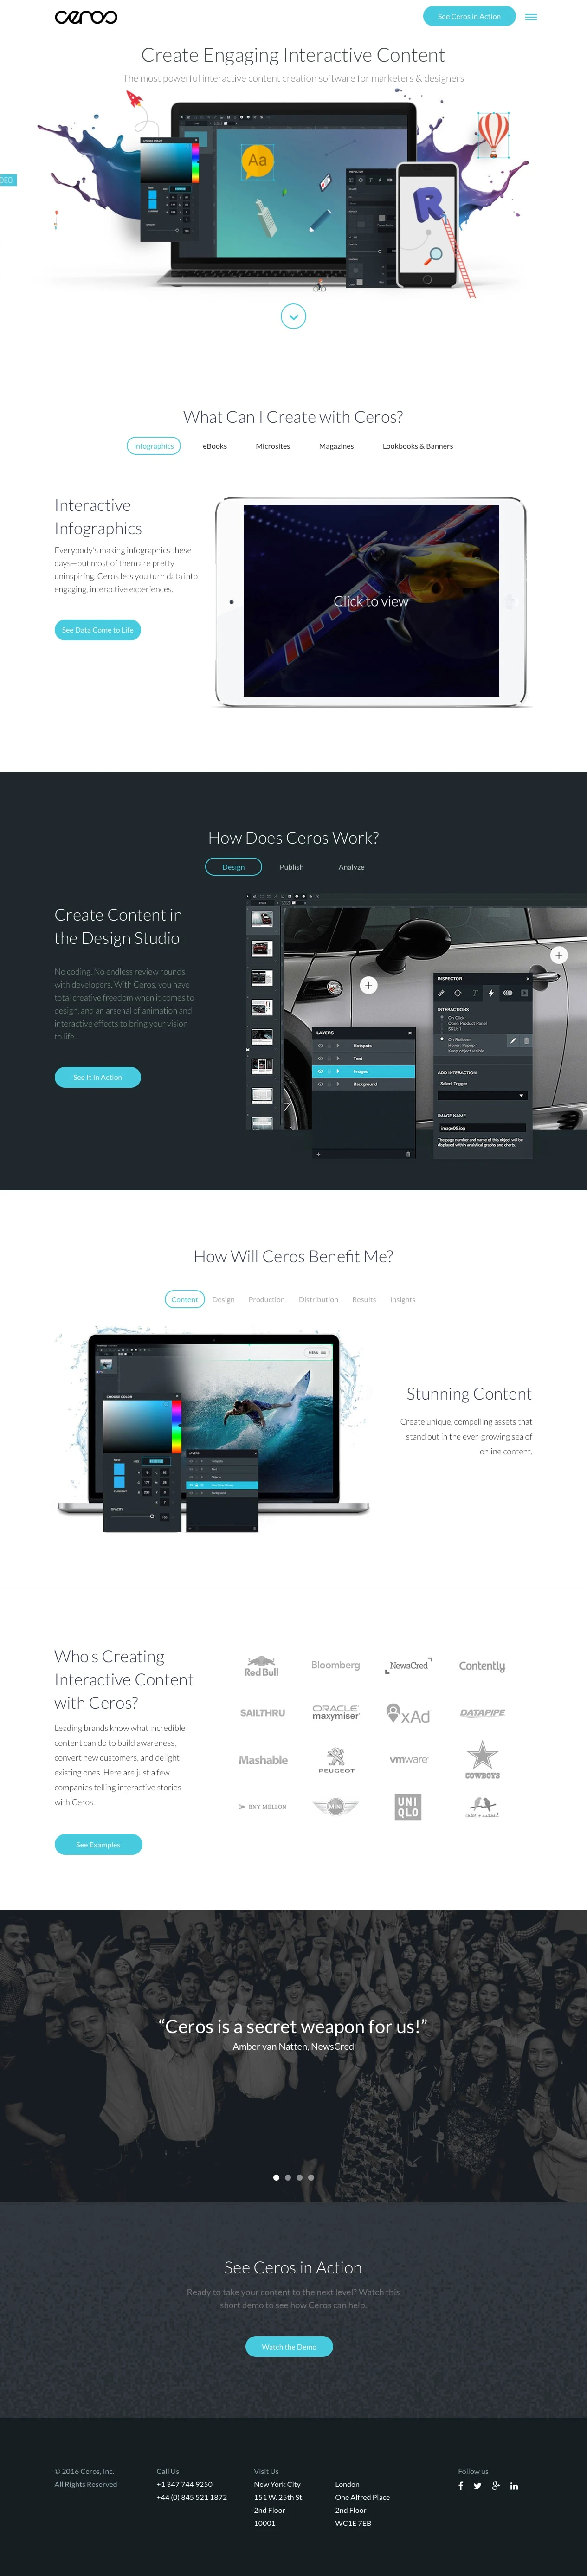 Ceros Landing Page Example: The most powerful interactive content creation software for marketers & designers